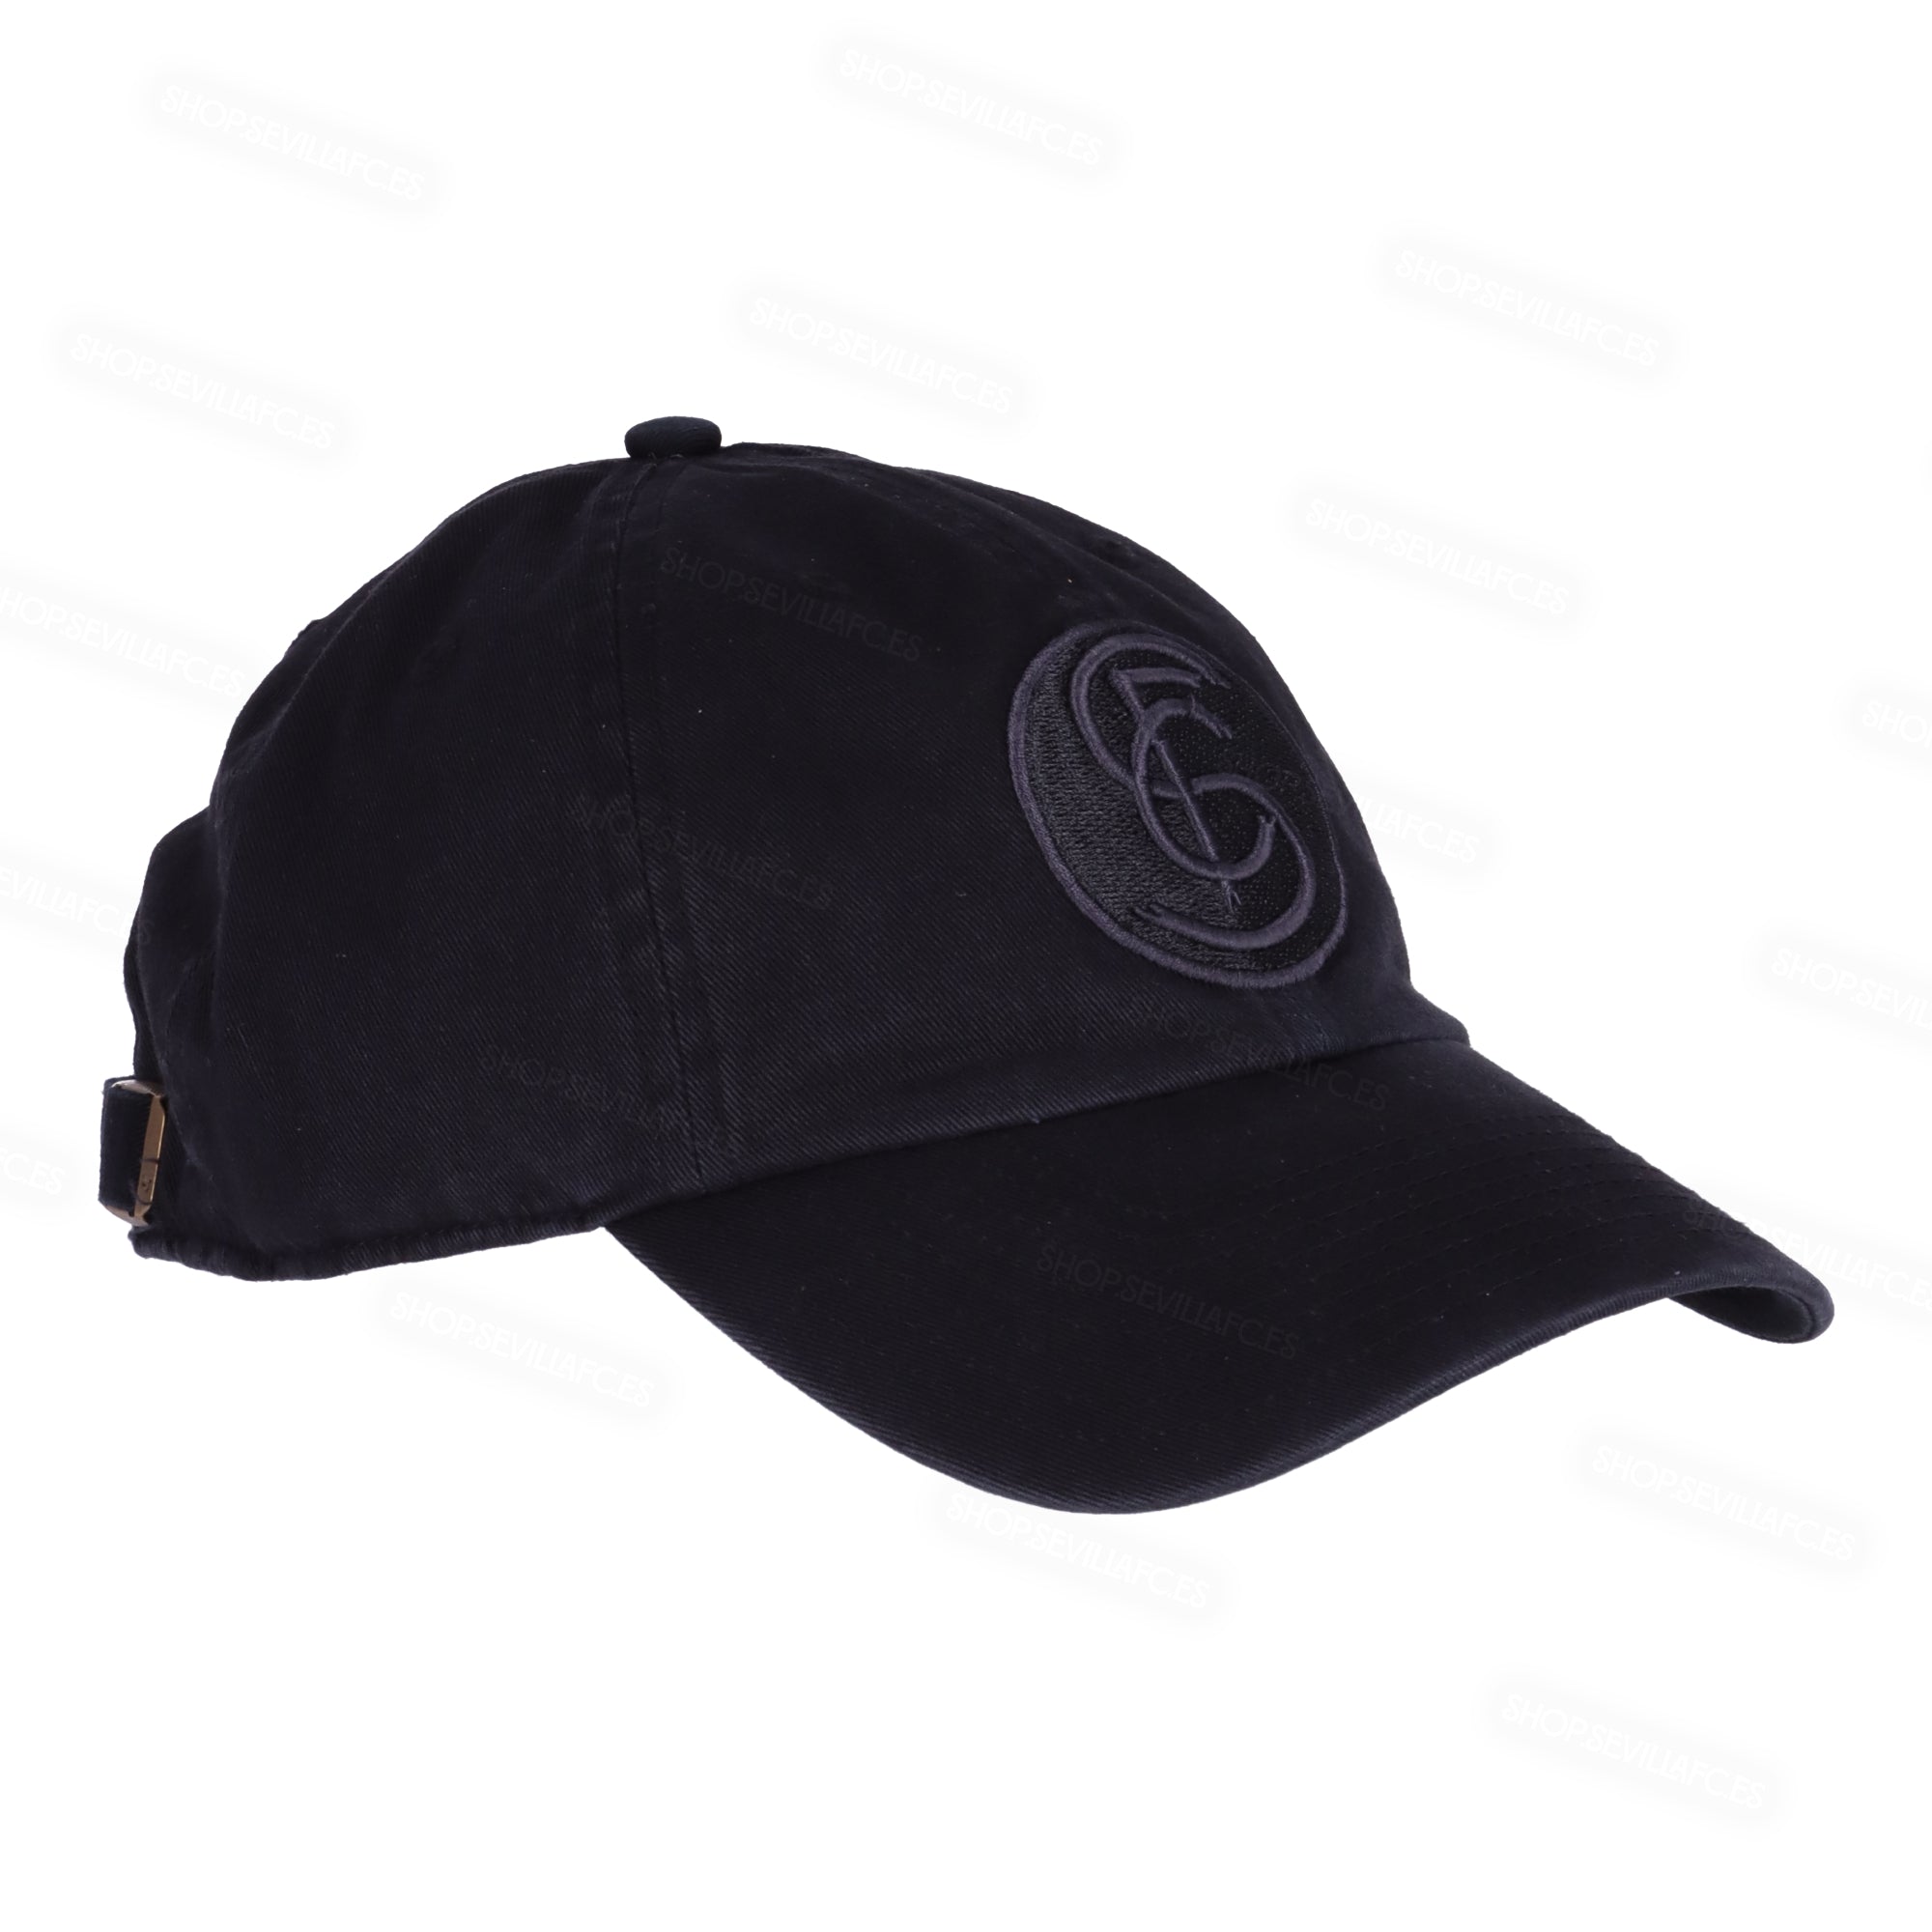 Black cap with embroidered SFC